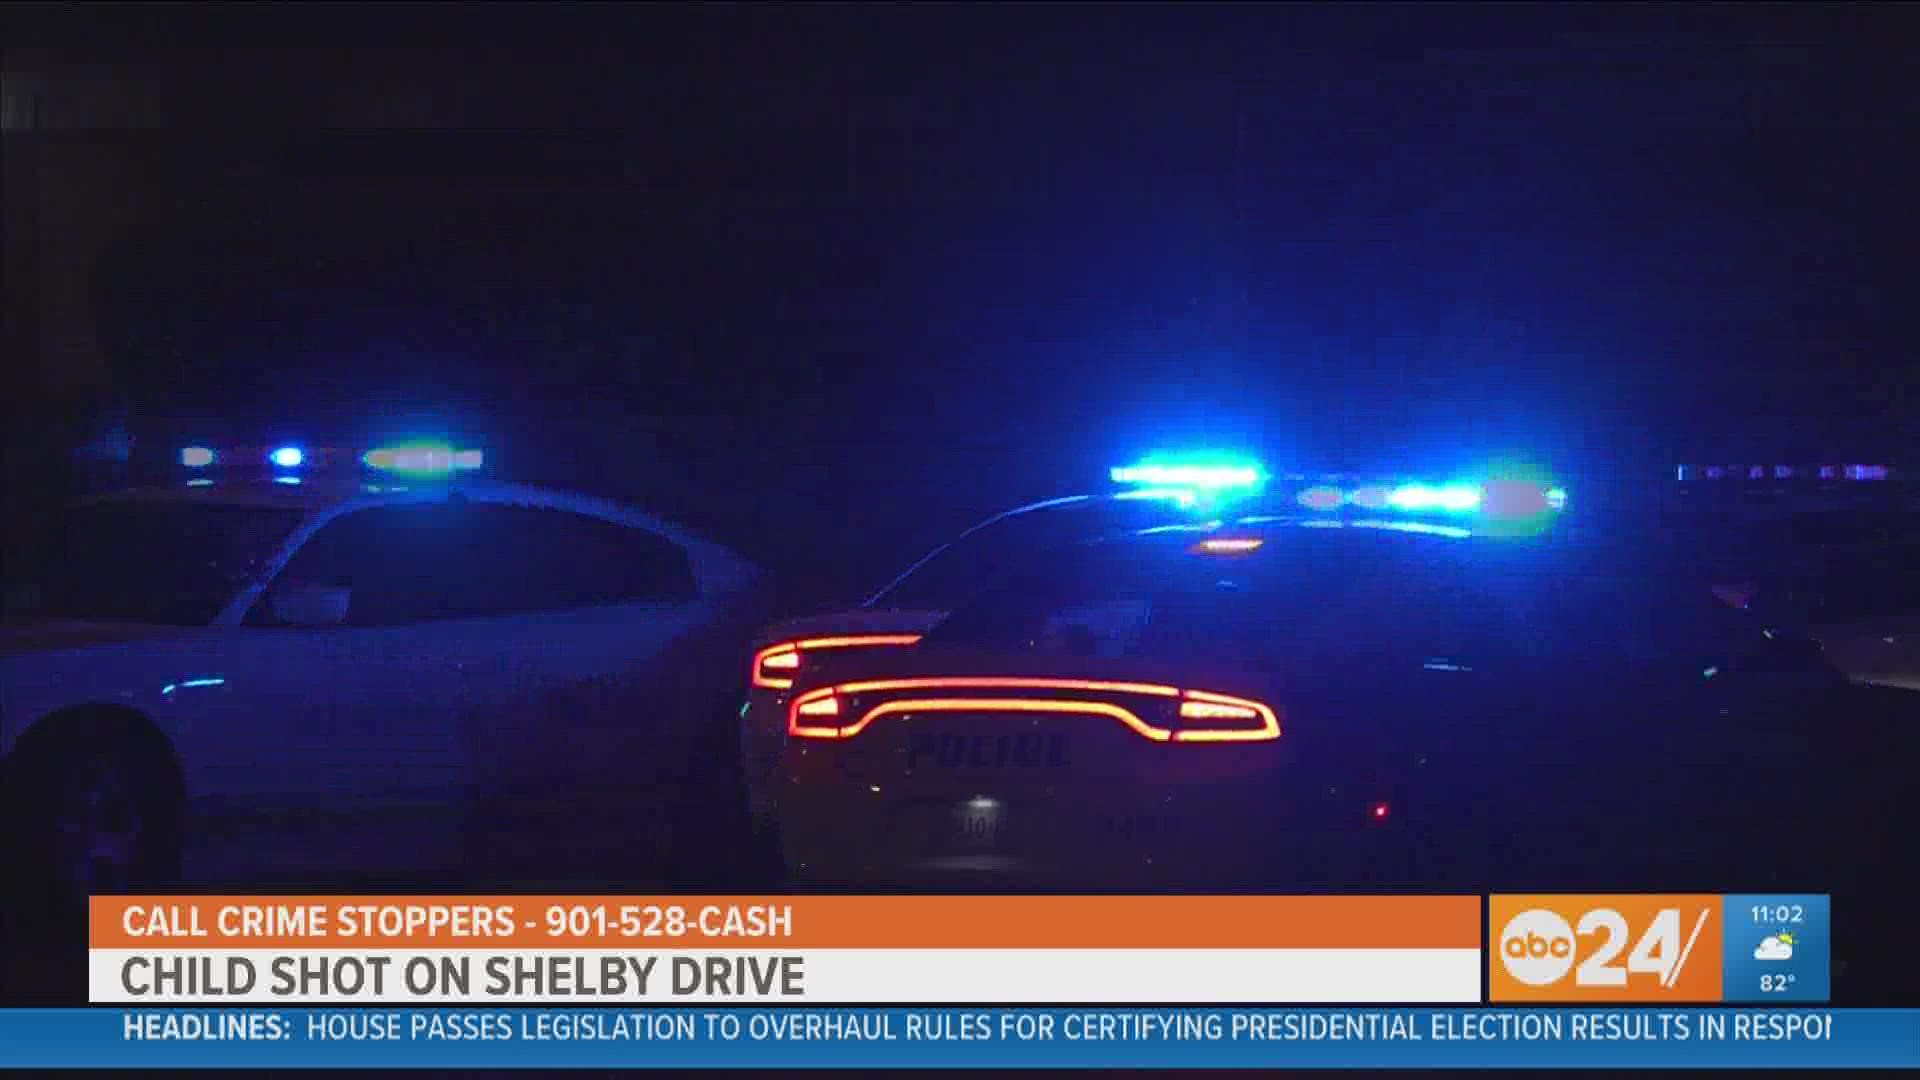 Memphis police said officers responded to a shooting near the 6100 block of East Shelby Drive at 9:15 p.m. Thursday.